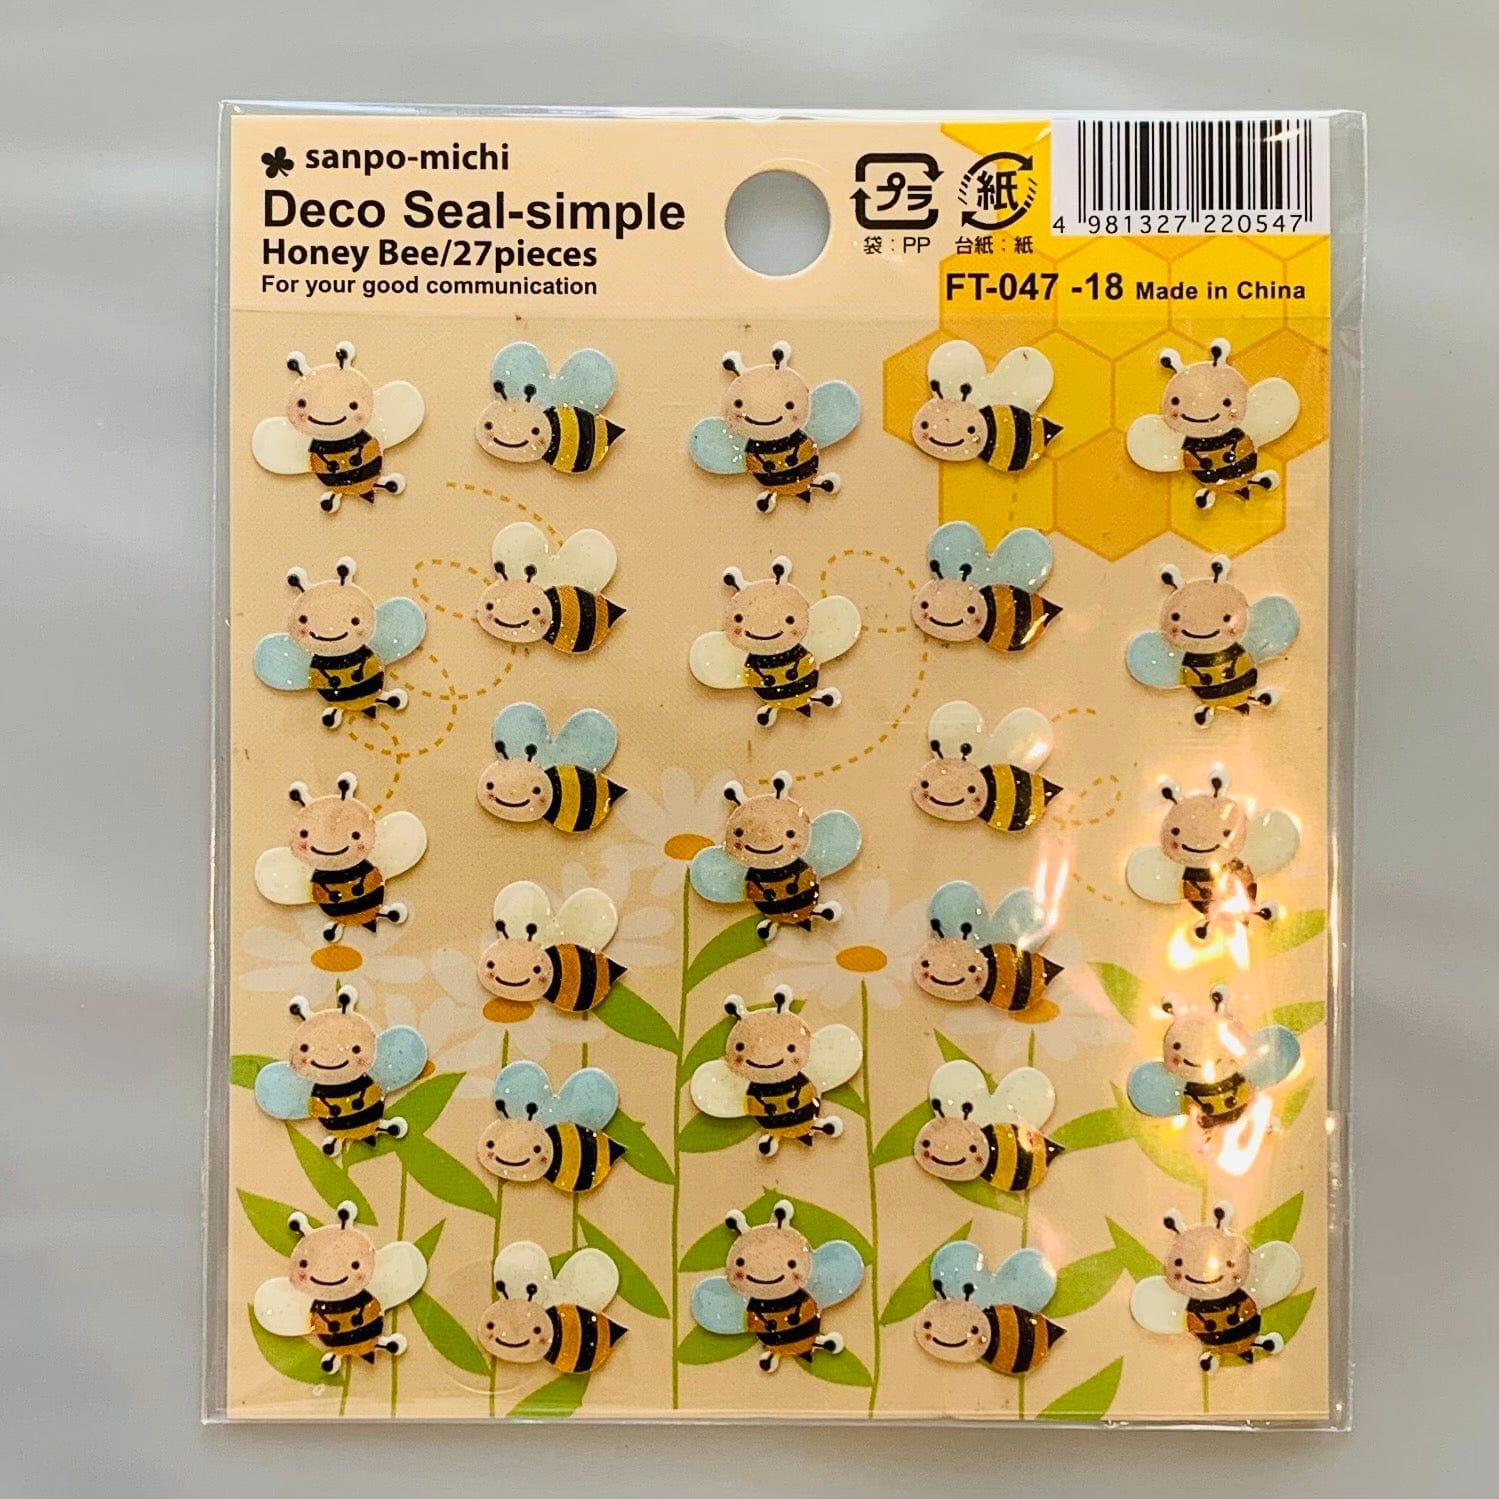 Toyolink Ark Road Deco Seal Bees Epoxy Stickers Kawaii Gifts 4981327220547